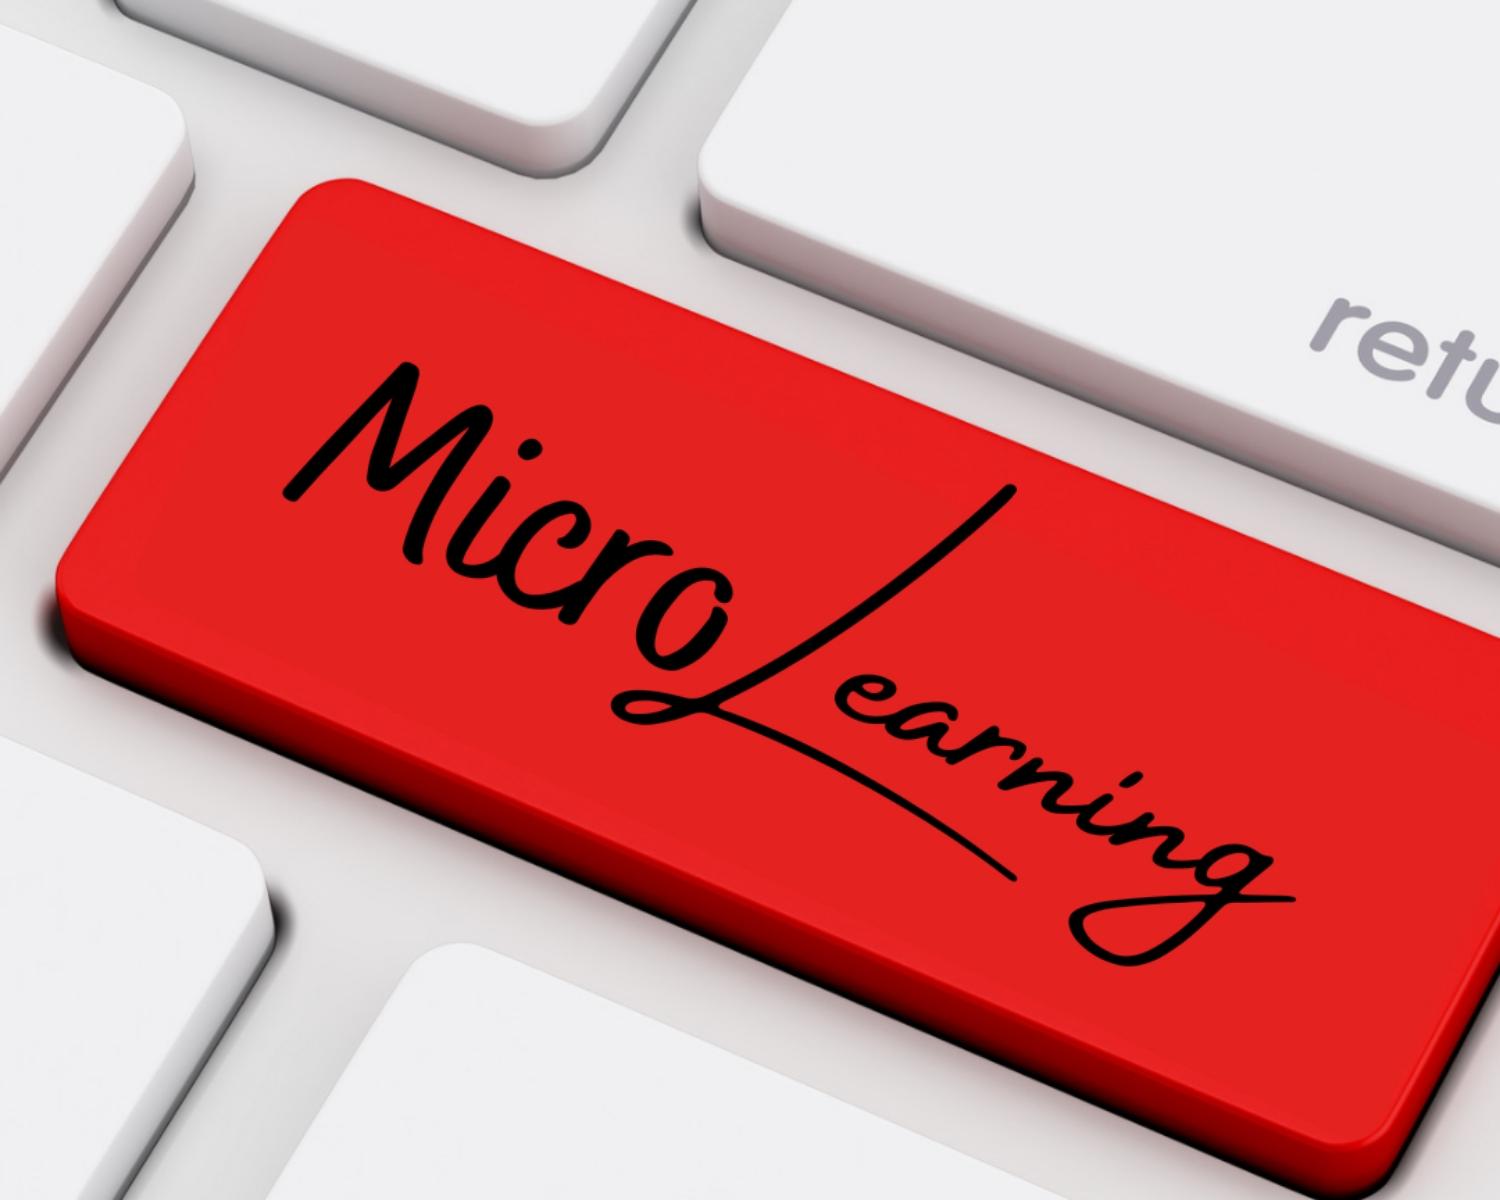 Microlearning 